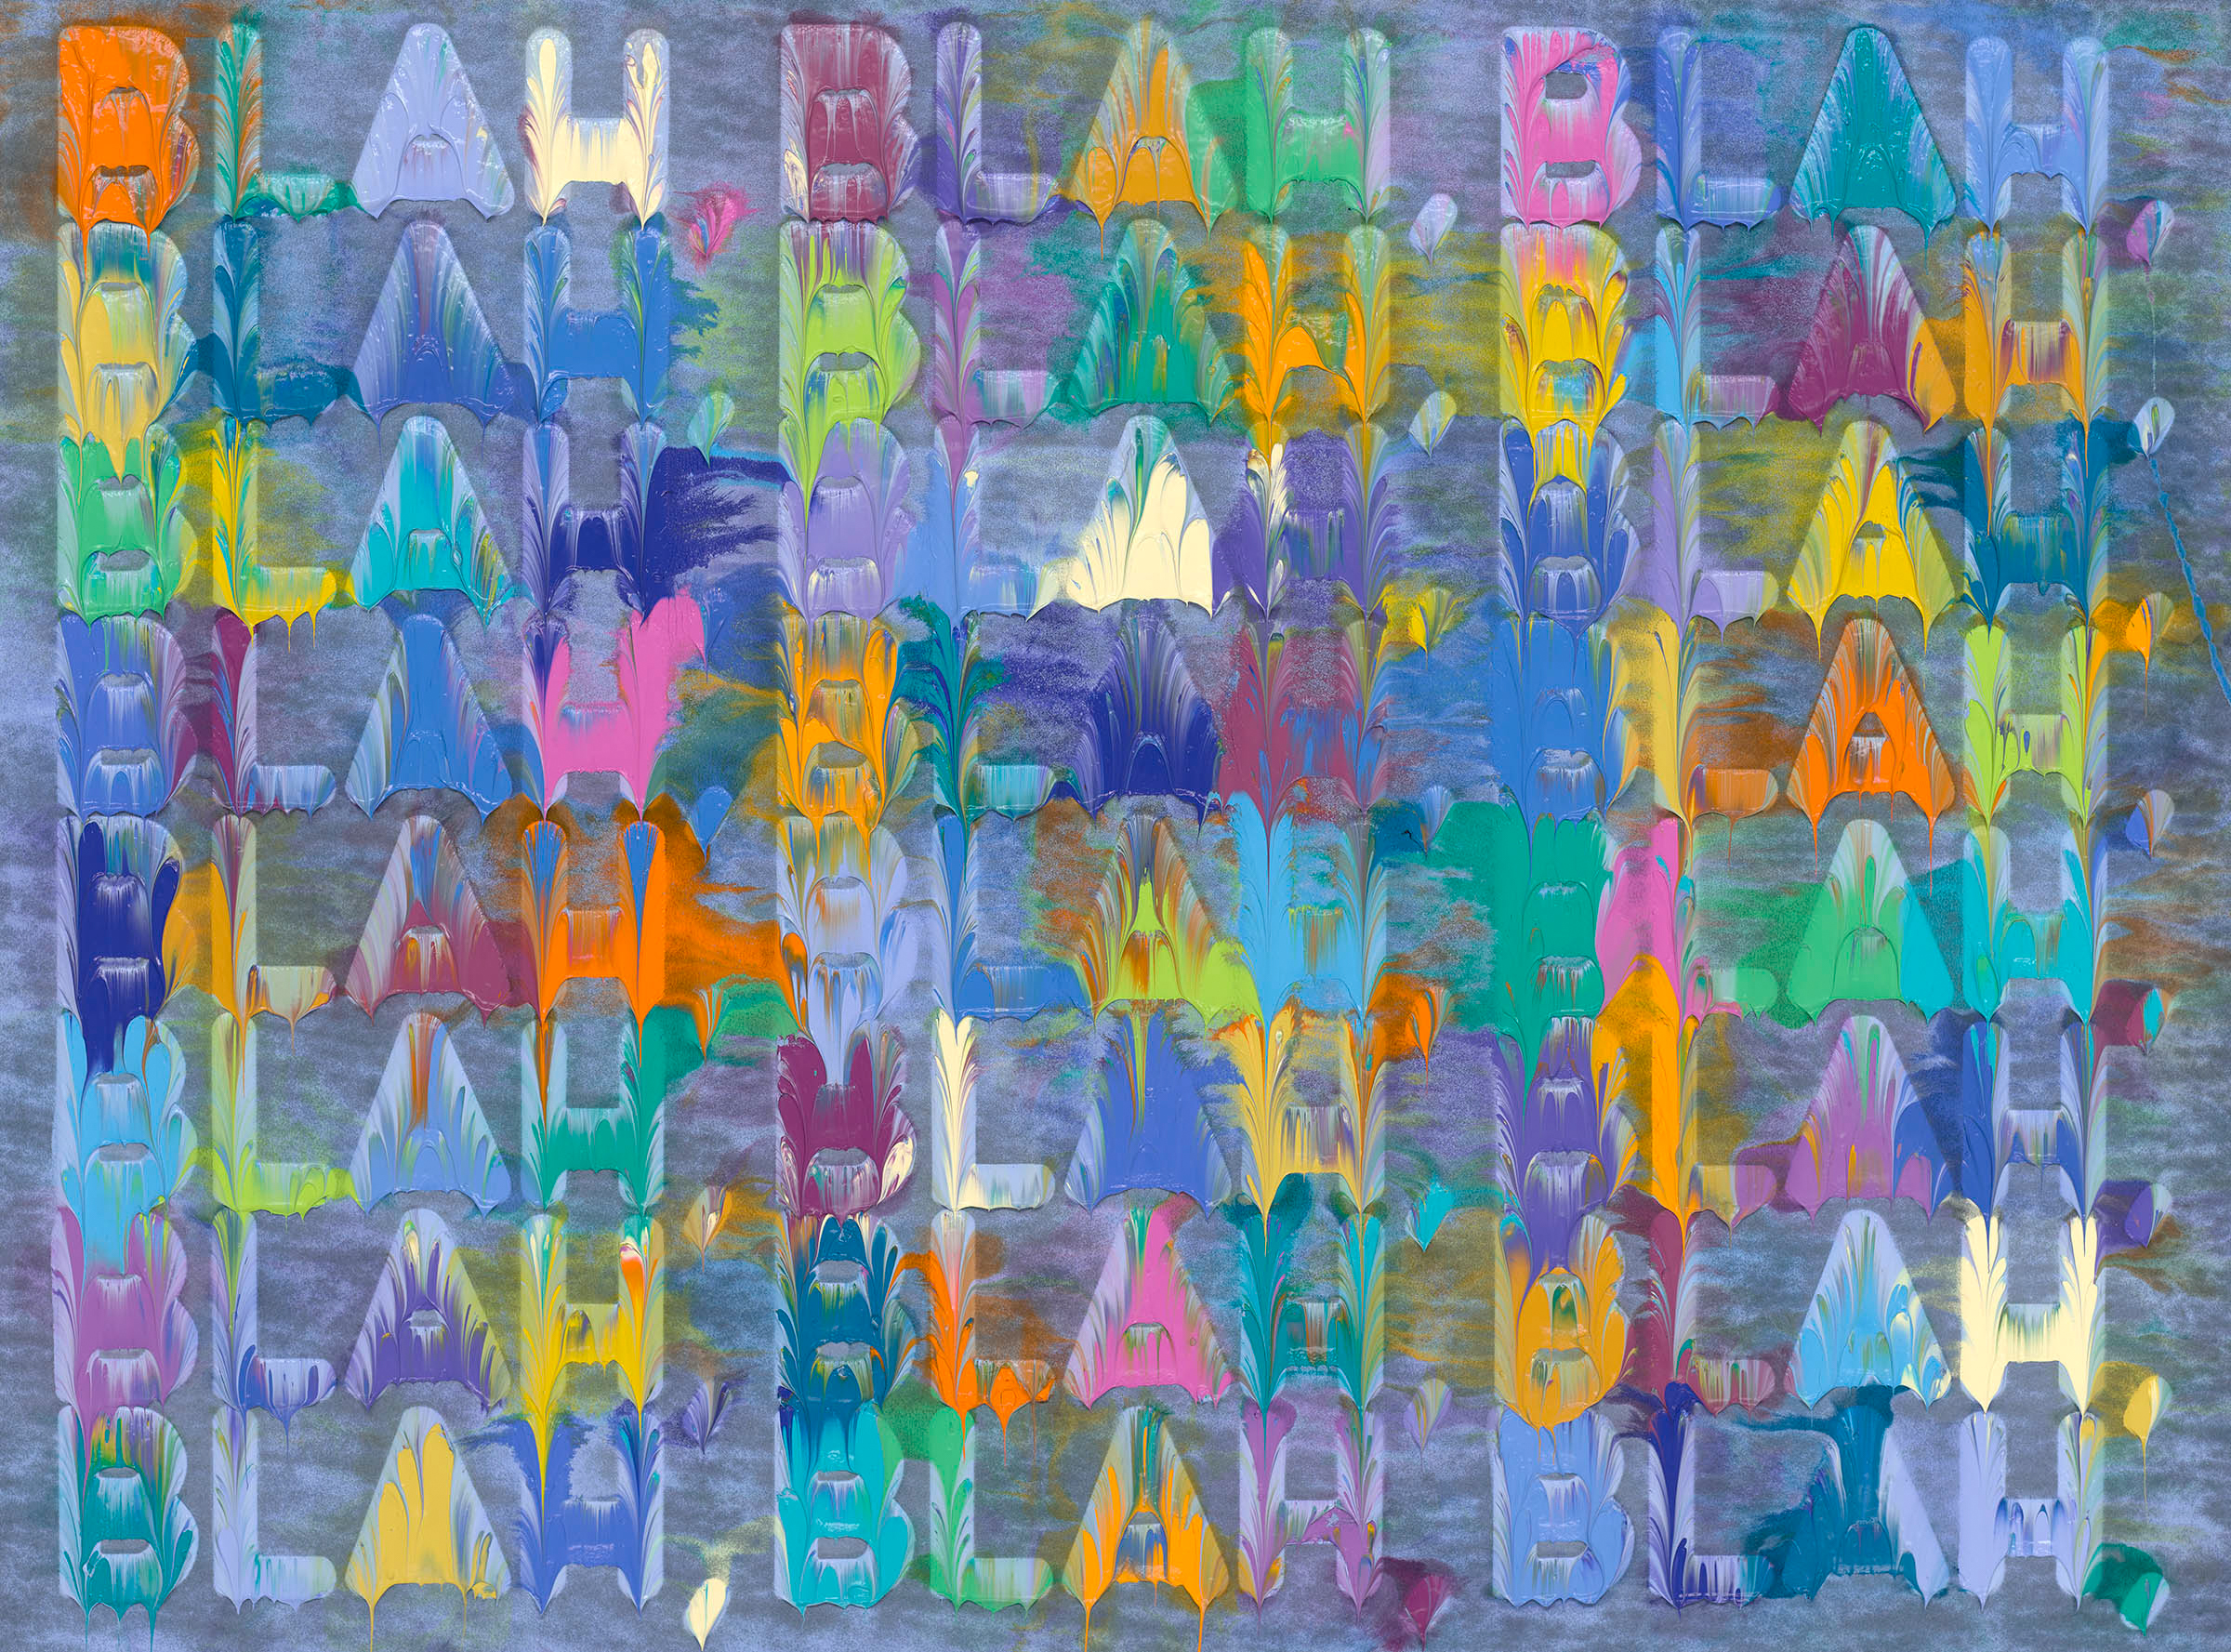 Color image of a multicolor painting with thick and glossy texture depicting the phrase blah blah blah